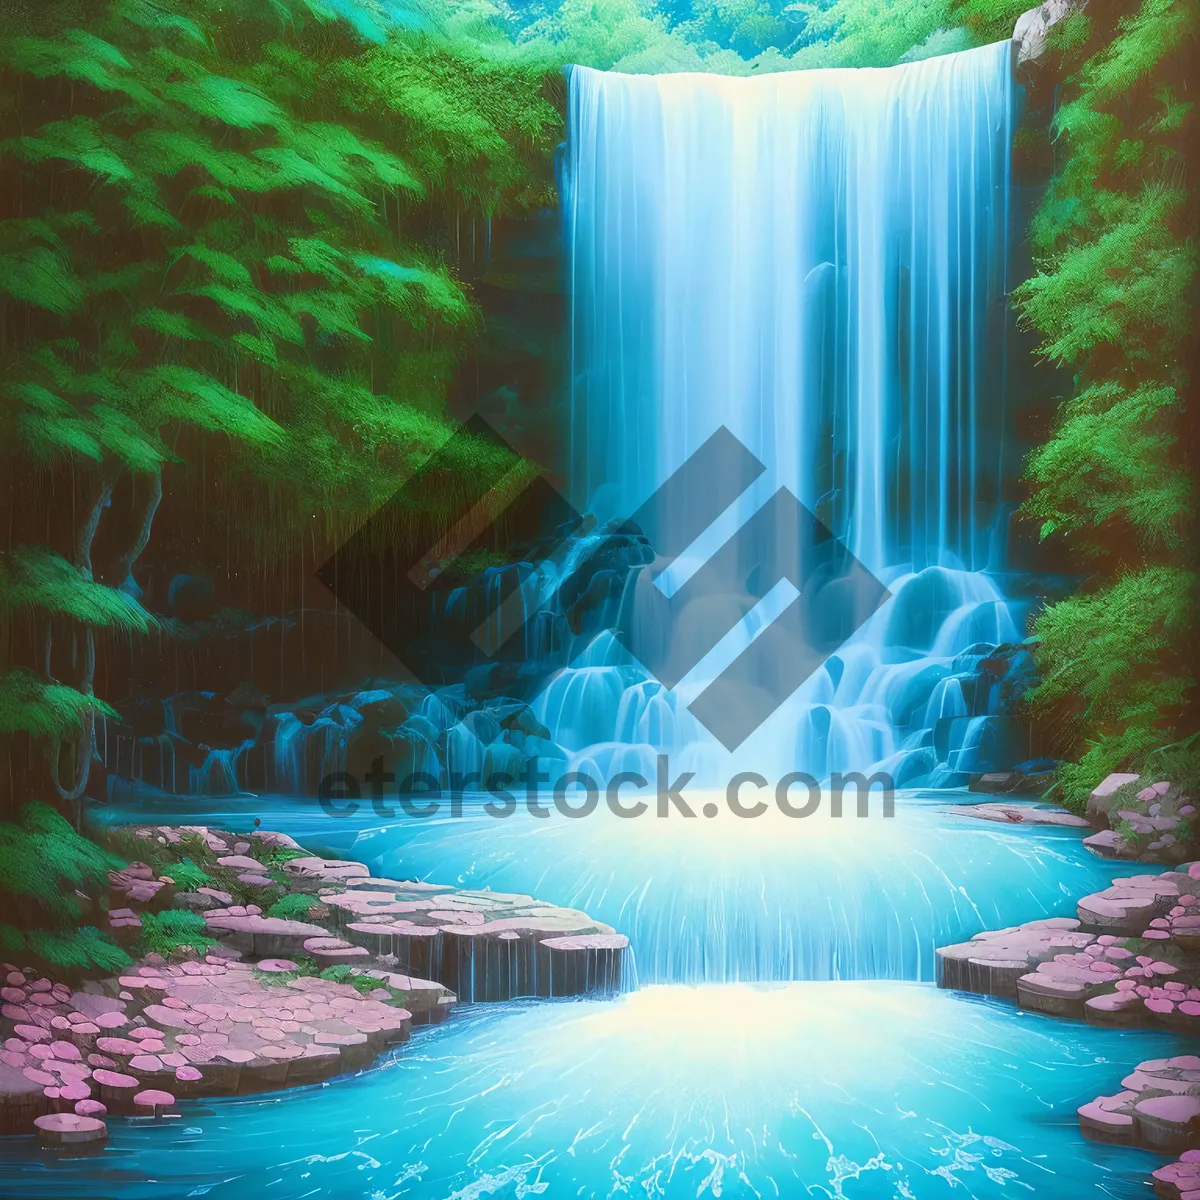 Picture of Serene Waterfall in the Summer Mountains